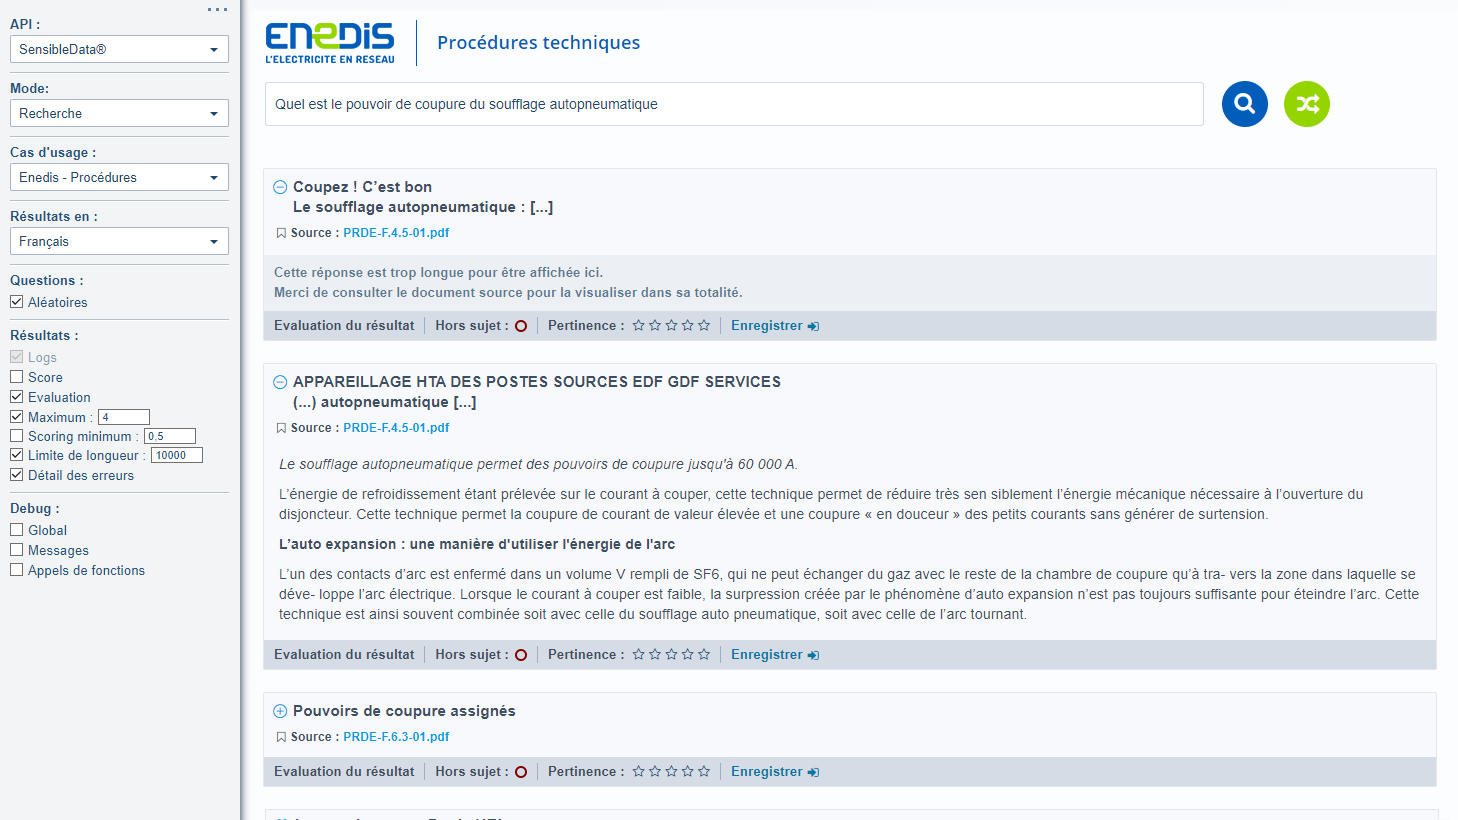 Enedis-Procedures - a SensibleSearch corporate data search application with an optional bot interface.